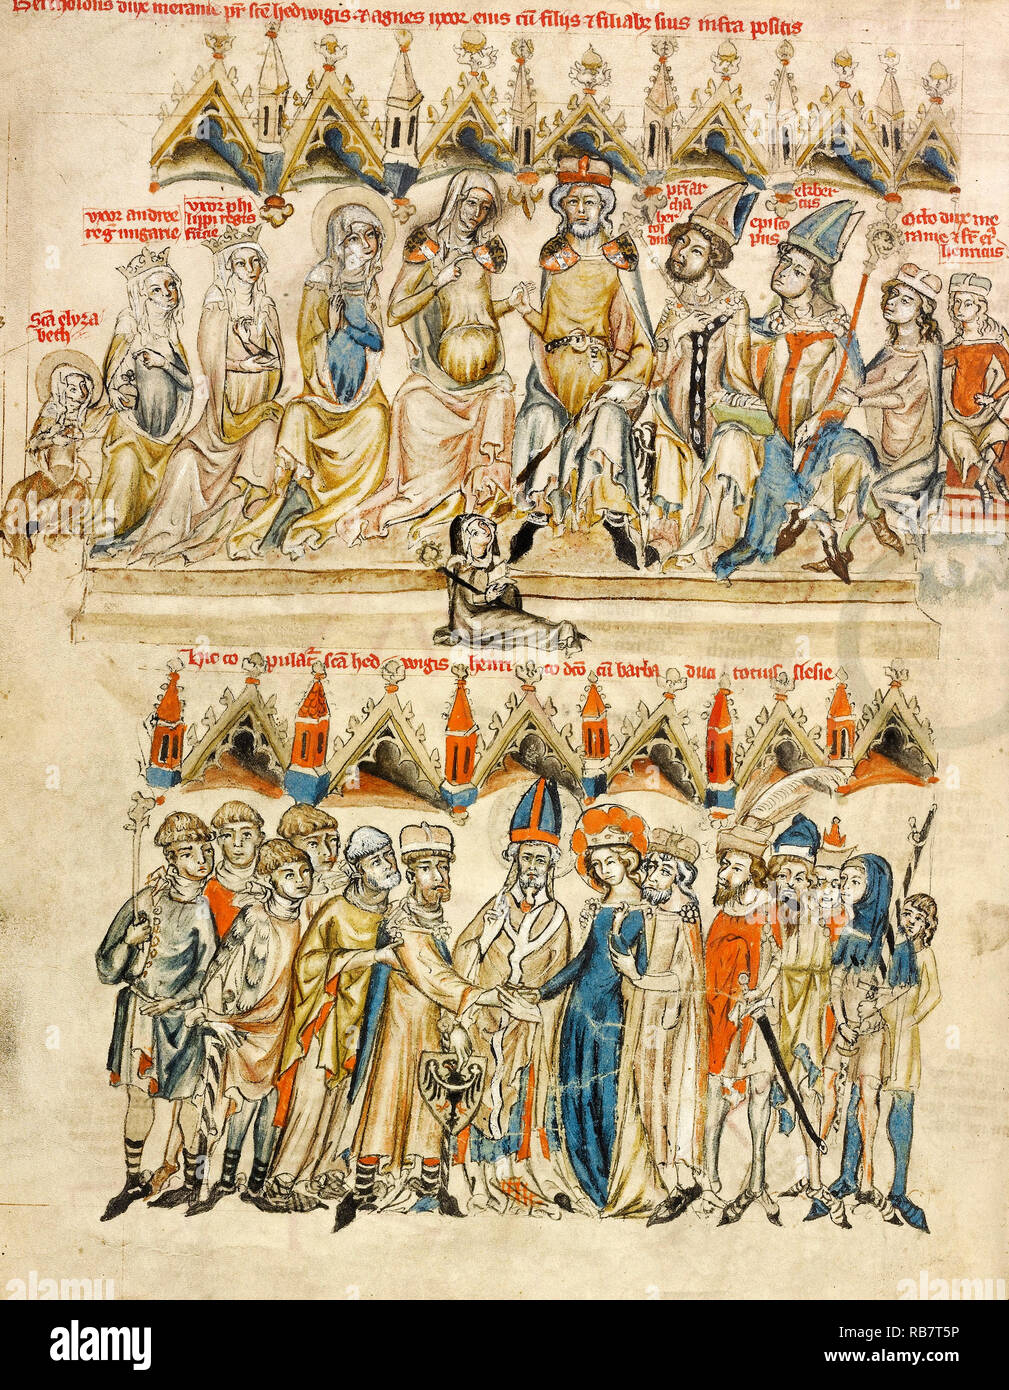 Court workshop of Duke Ludwig I of Liegnitz and Brieg, The Family of Berthold VI; The Marriage of Hedwig and Heinrich, 1353 Tempera colors, colored washes, and ink on parchment, The J. Paul Getty Museum, Los Angeles, USA. Stock Photo